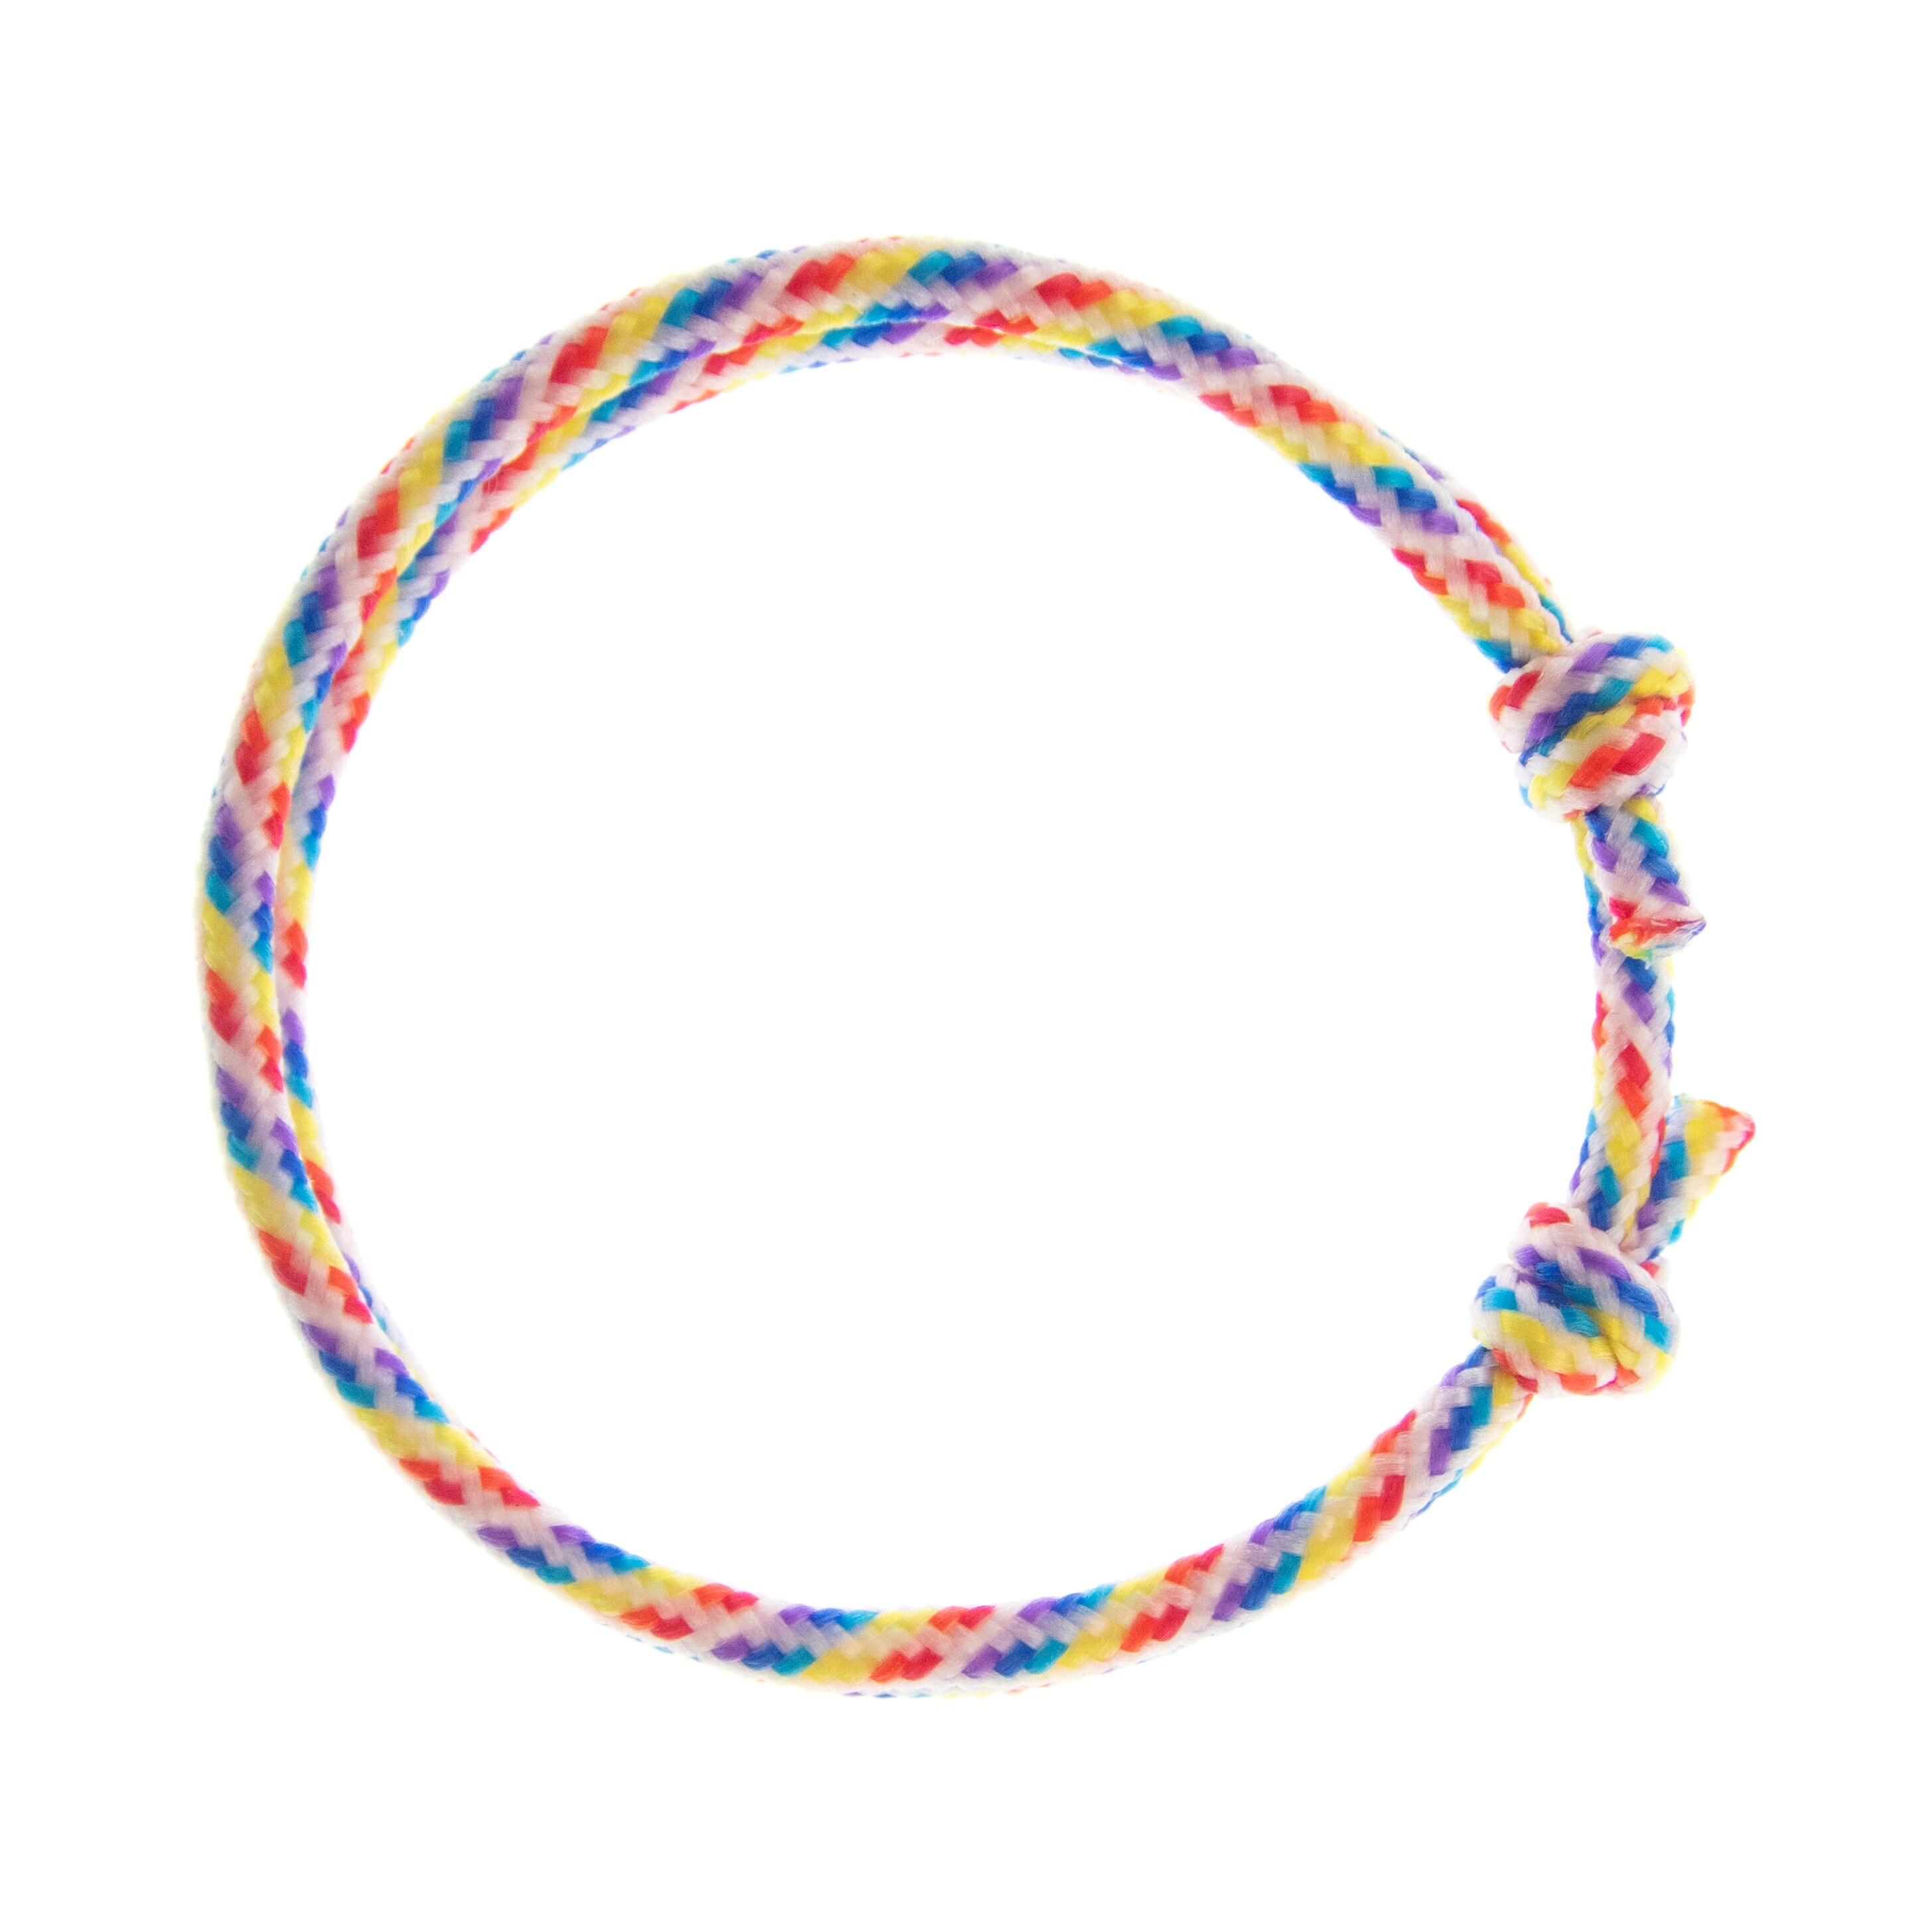 Rainbow Bracelet String, Eternity Cord Cuff, Friendship Equality Gift,  Hope, Pride LGBT Paracord Jewelry. Unisex. 2mm